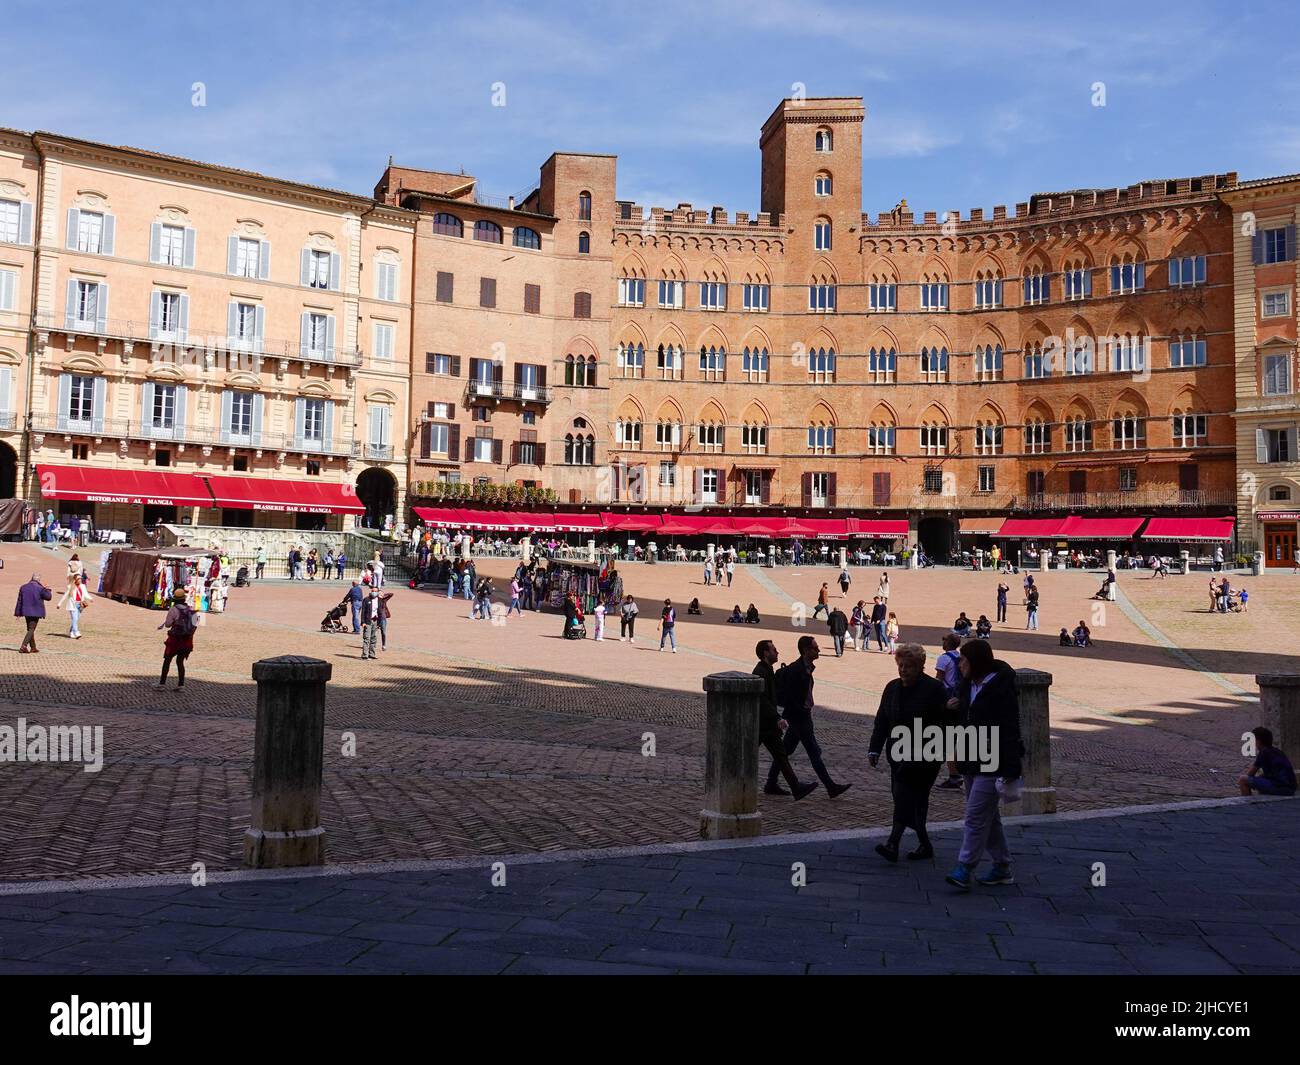 People mingling and the imposing brick facades of buildings in the Piazza del Campo, Siena, Italy, located in the heart of Tuscany. Stock Photo